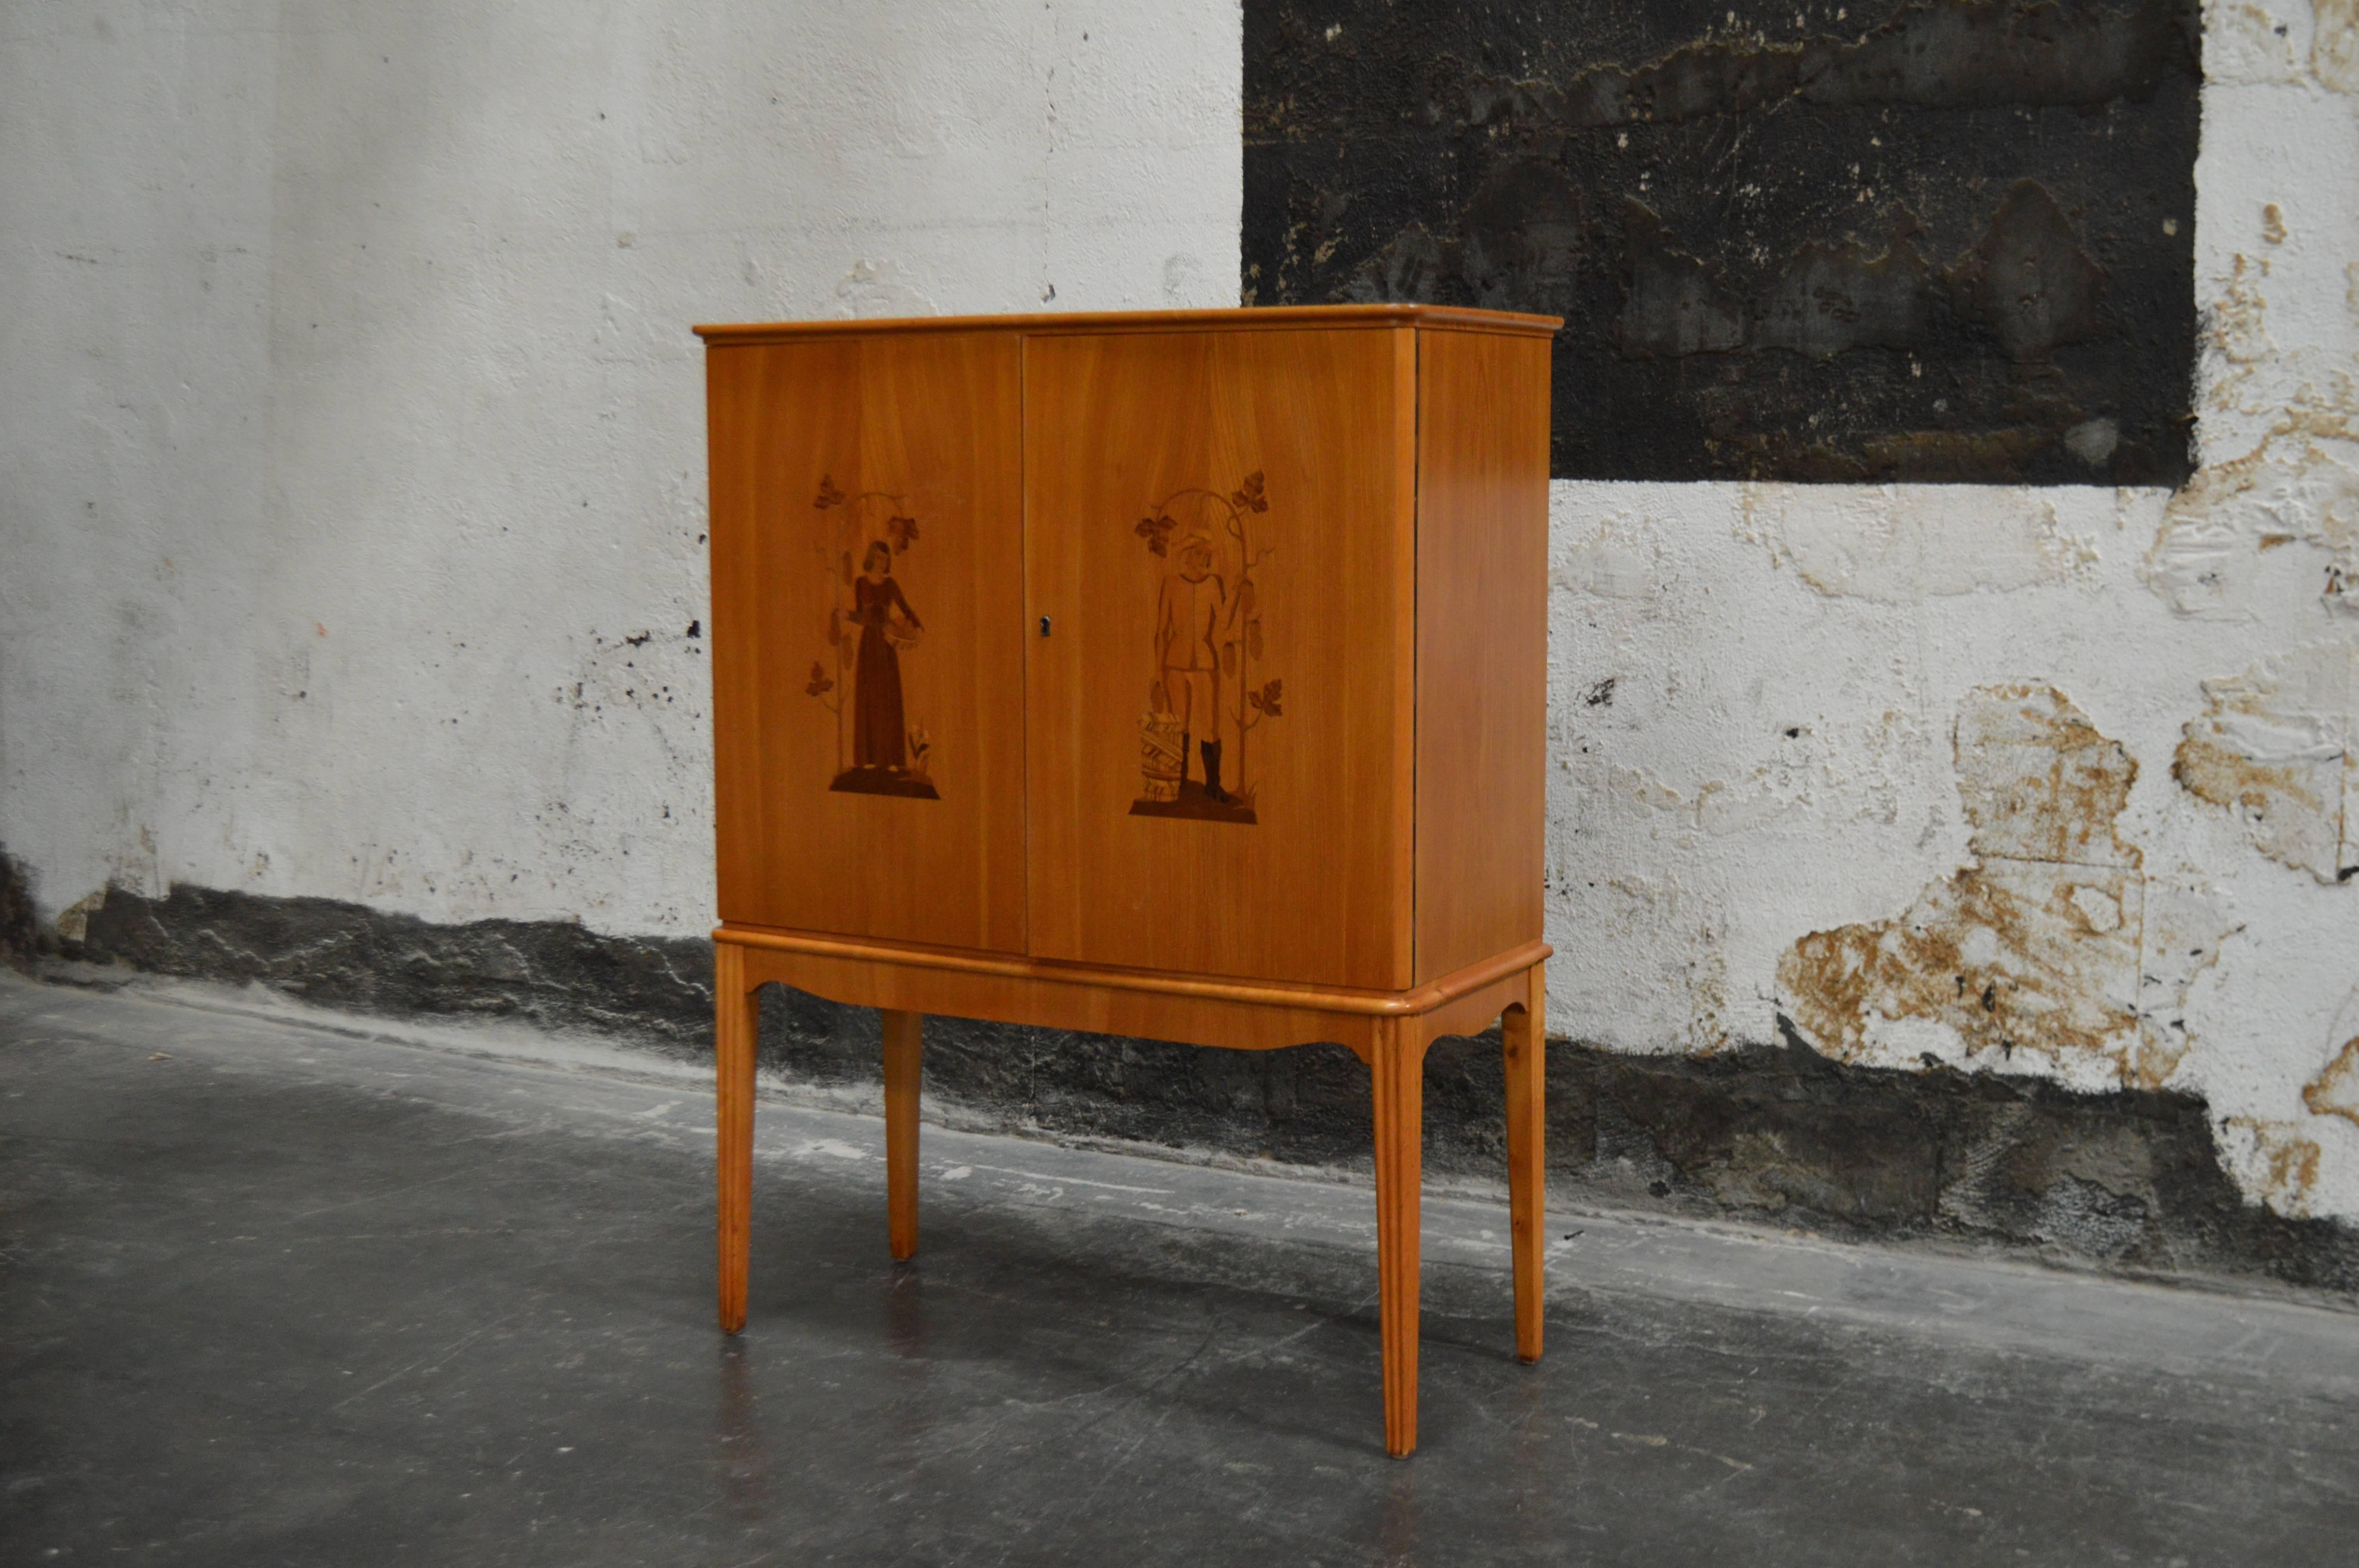 Swedish Art Deco, verging on Art Moderne, storage, bar cabinet in elm, Carpathian elm and dark flame birch with intarsia doors. Upper storage area has adjustable shelving and two interior drawers. Inlaid figures on each upper door. Key included.